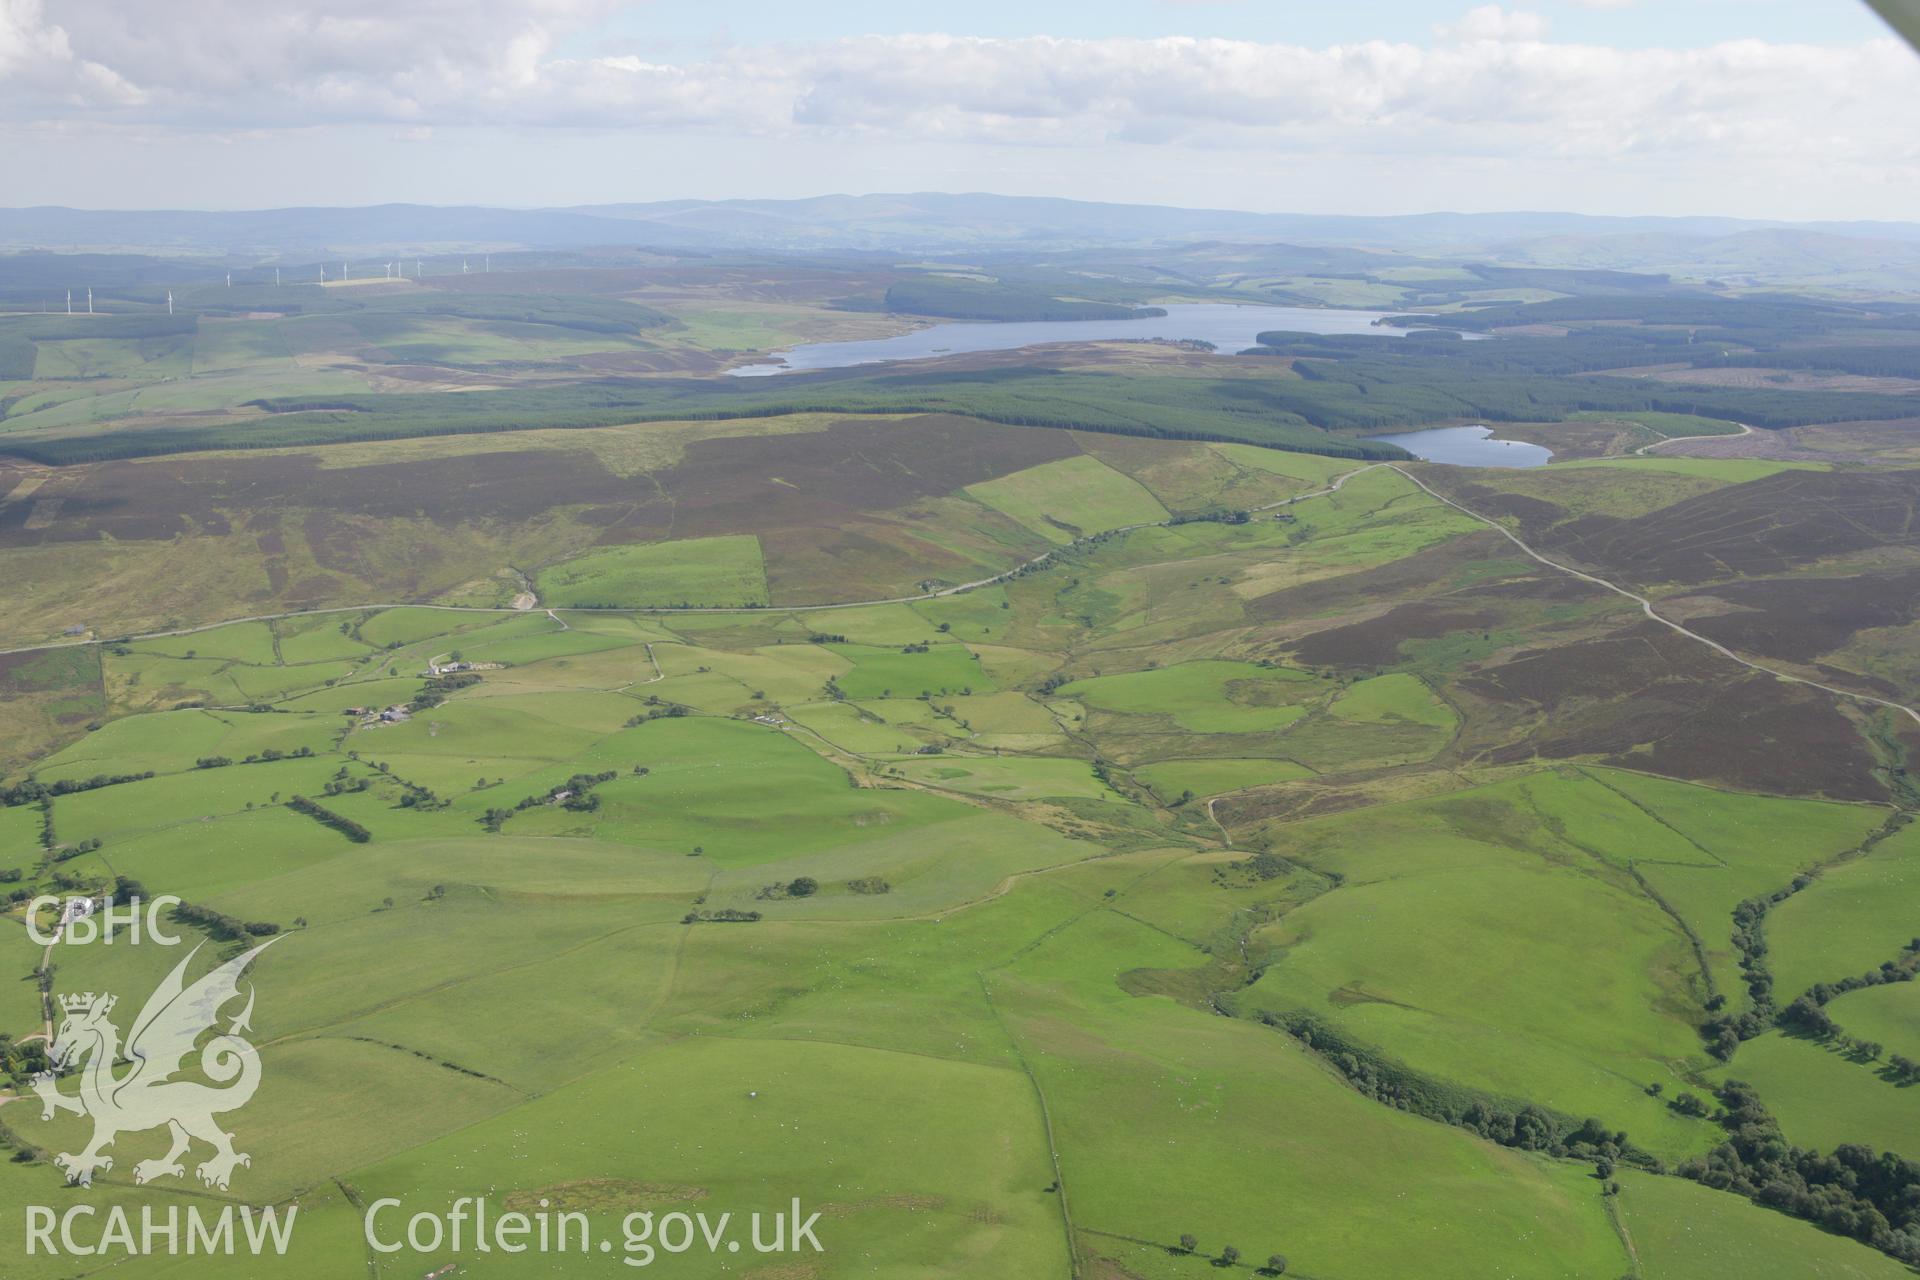 RCAHMW colour oblique aerial photograph showing landscape of Llyn Brenig, Mynydd Hiraethog, viewed from the north-west. Taken on 31 July 2007 by Toby Driver